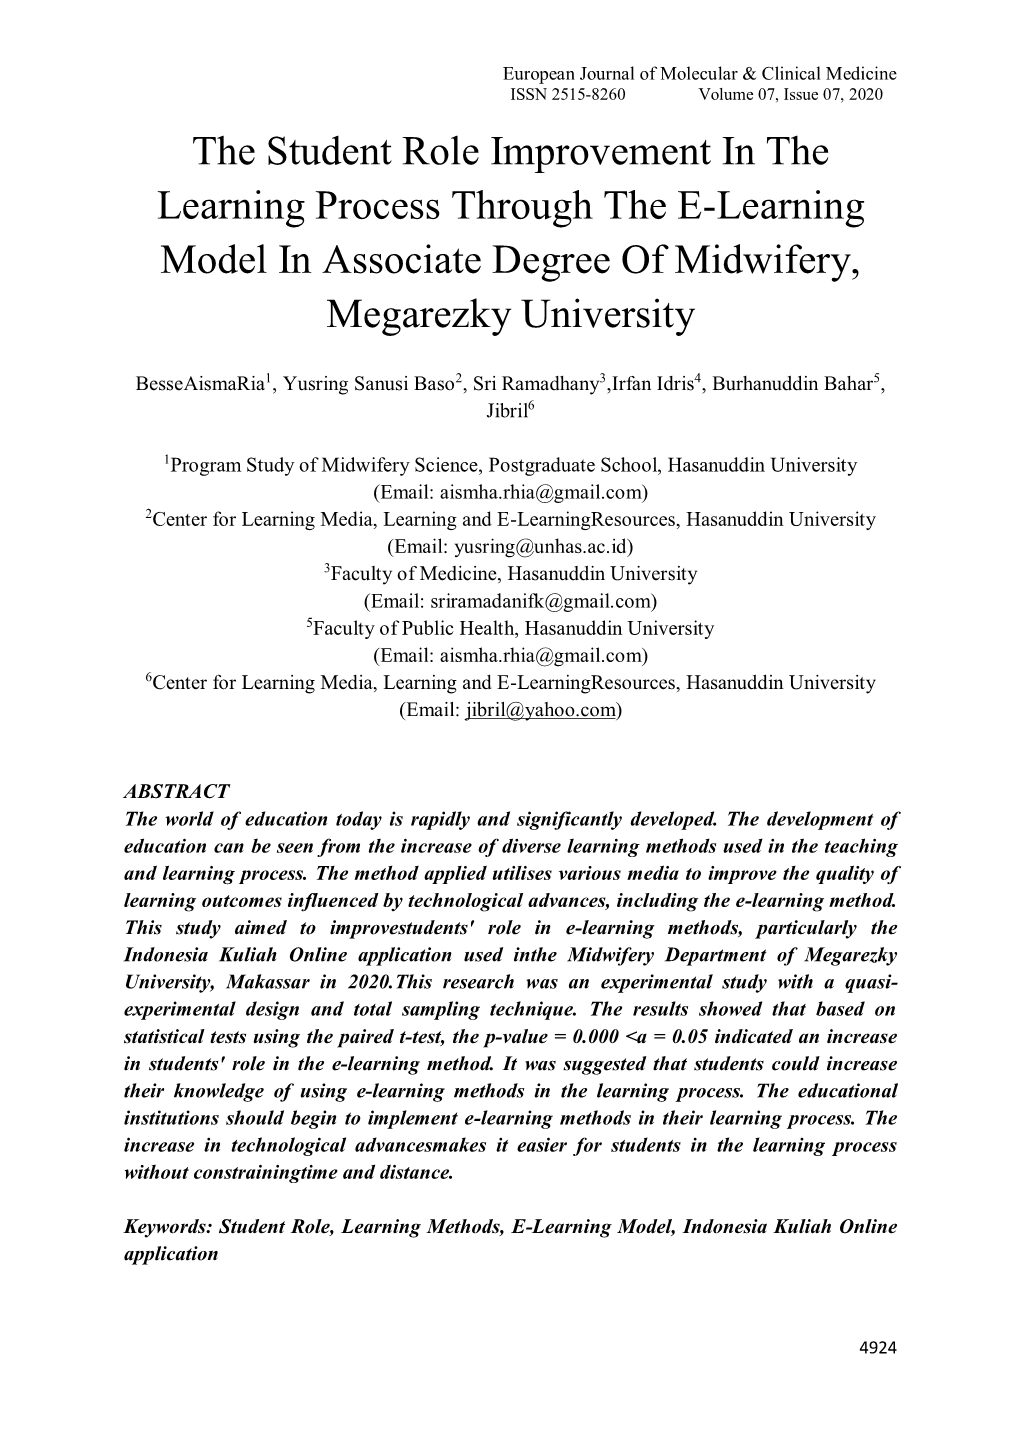 The Student Role Improvement in the Learning Process Through the E-Learning Model in Associate Degree of Midwifery, Megarezky University